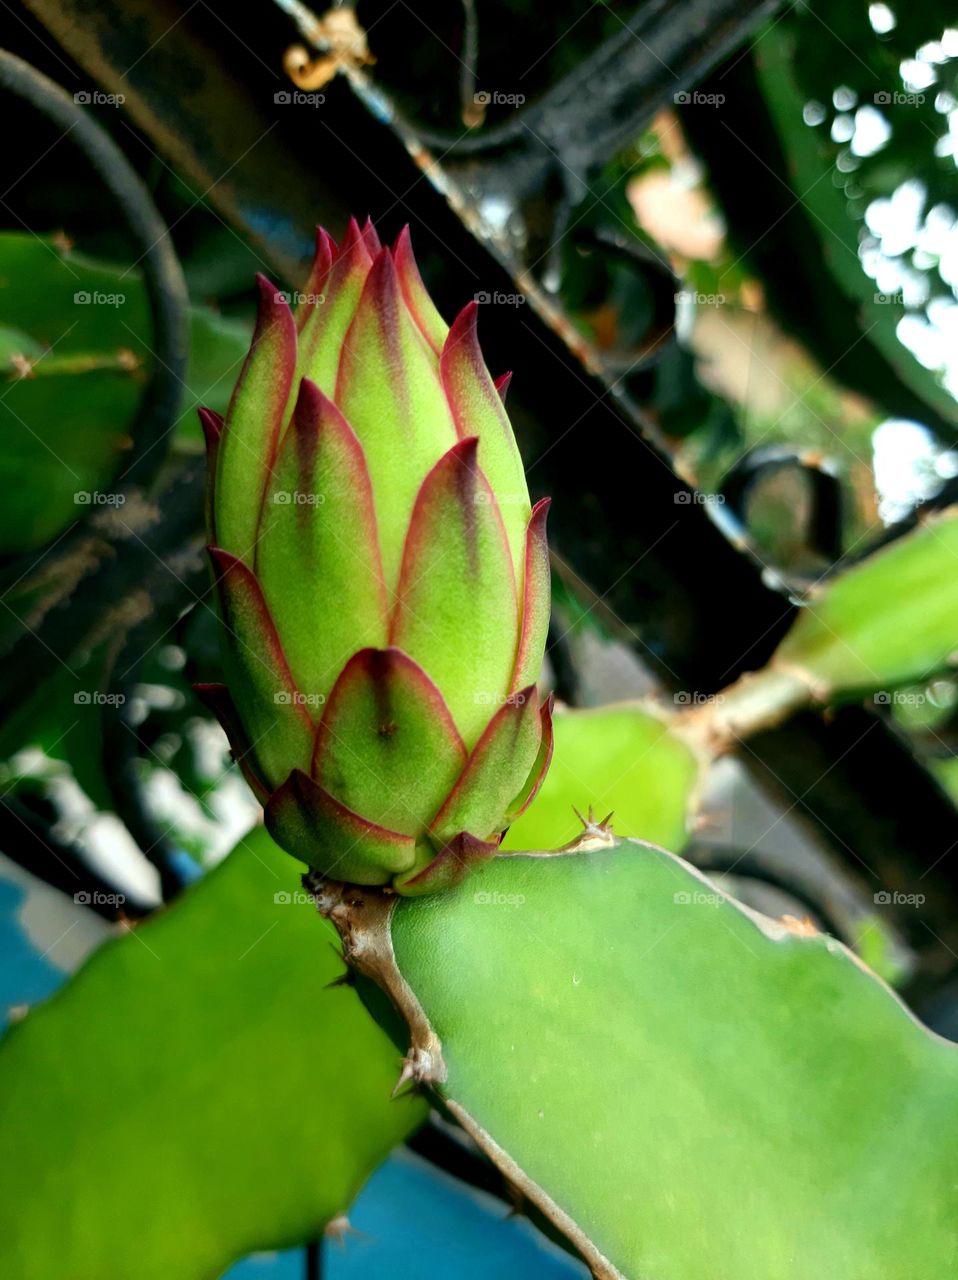 flower candidate from dragon fruit plant